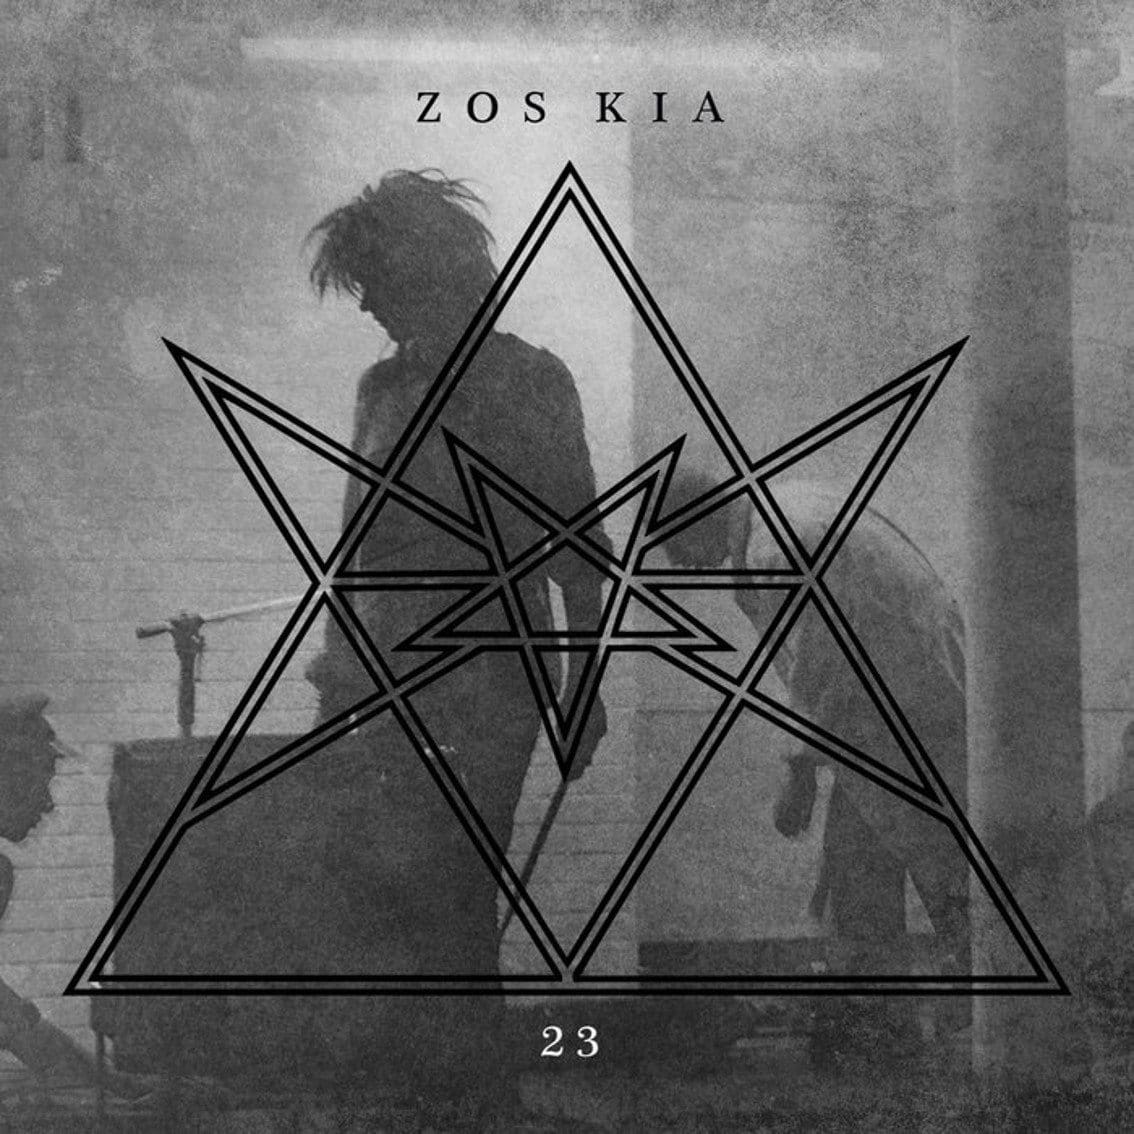 Coil fans get ready for the Zos Kia album '23' out as a 2CD digibook